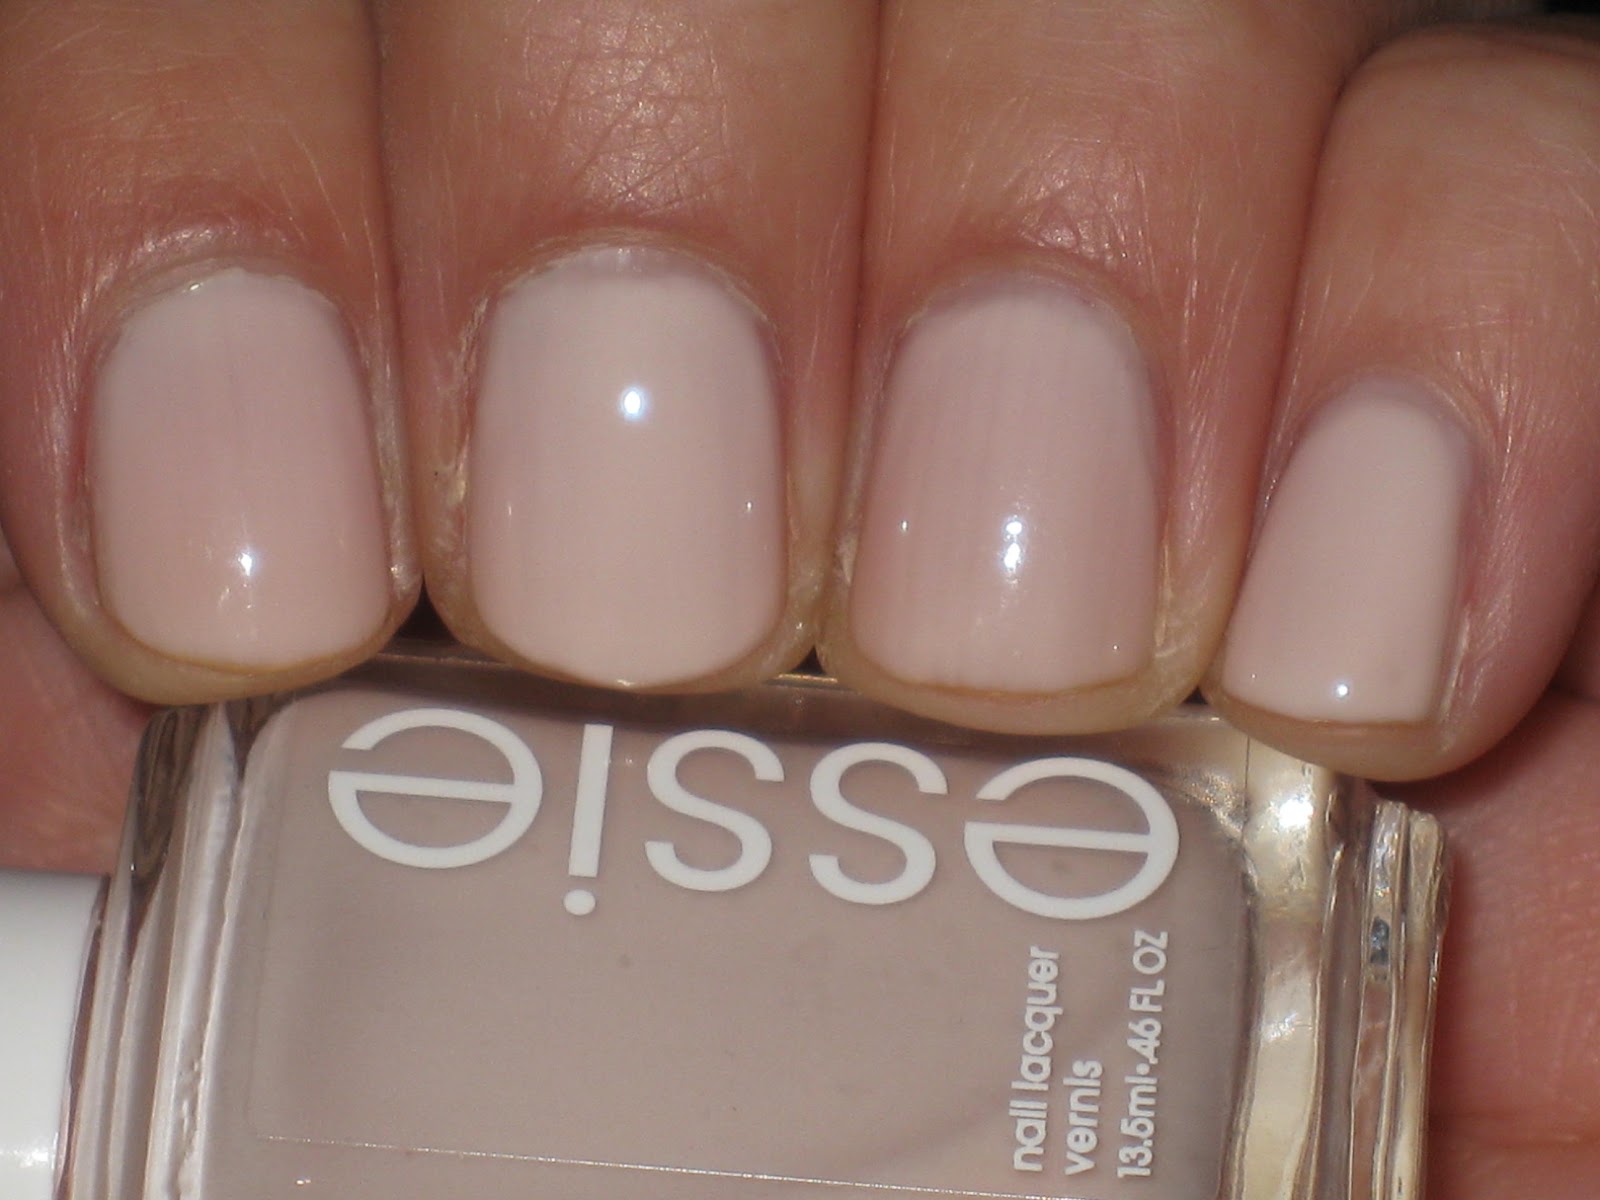 Essie Nail Polish in "Ballet Slippers" - wide 4